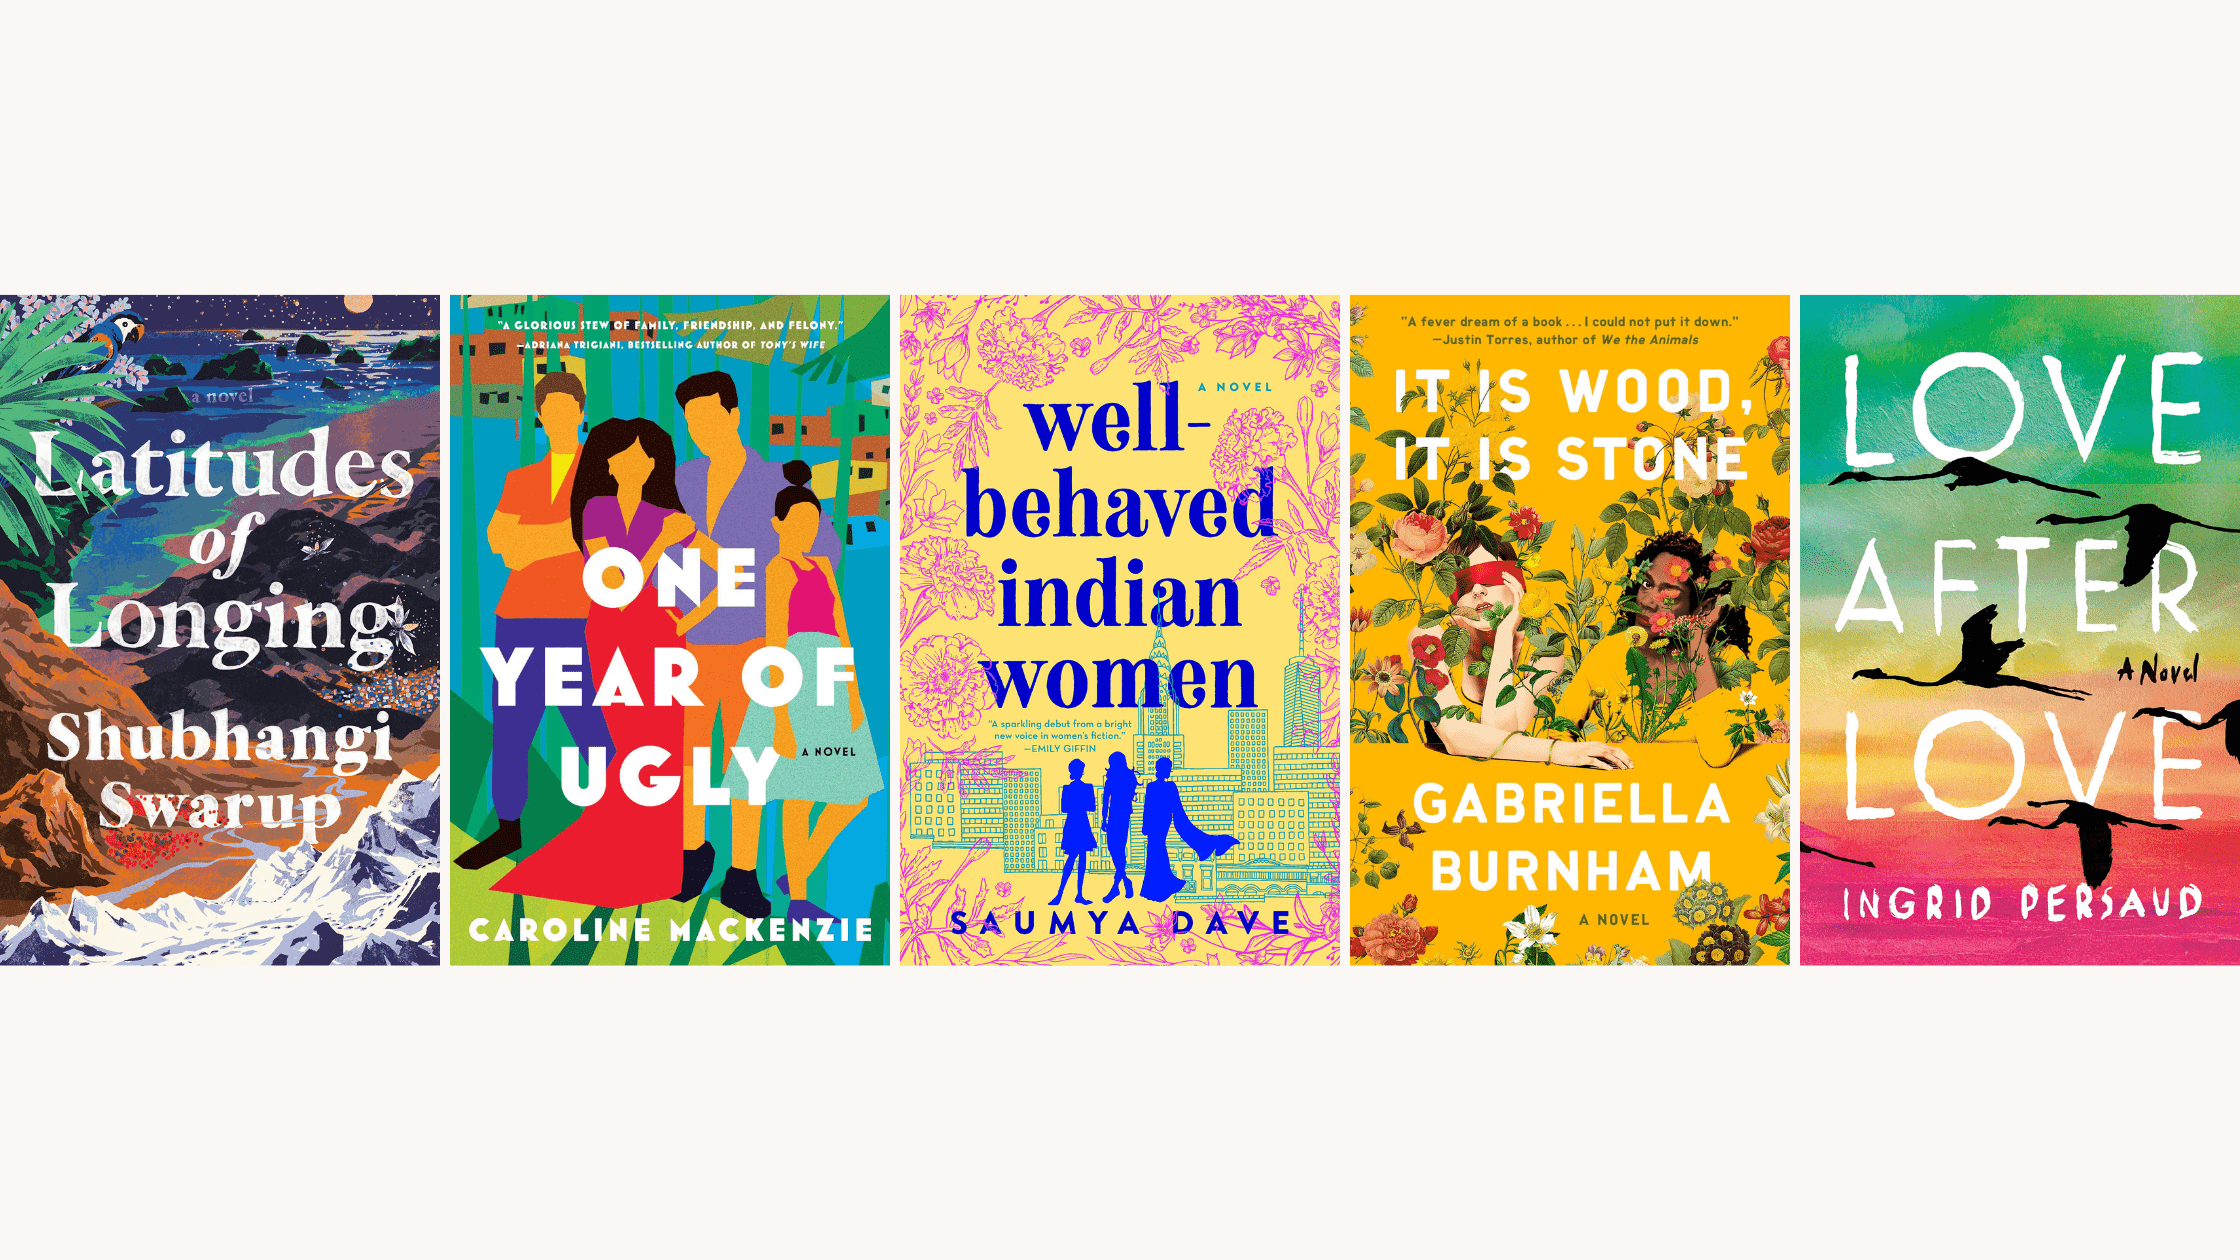 Multicultural Books in The 2020 Summer Reading Guide